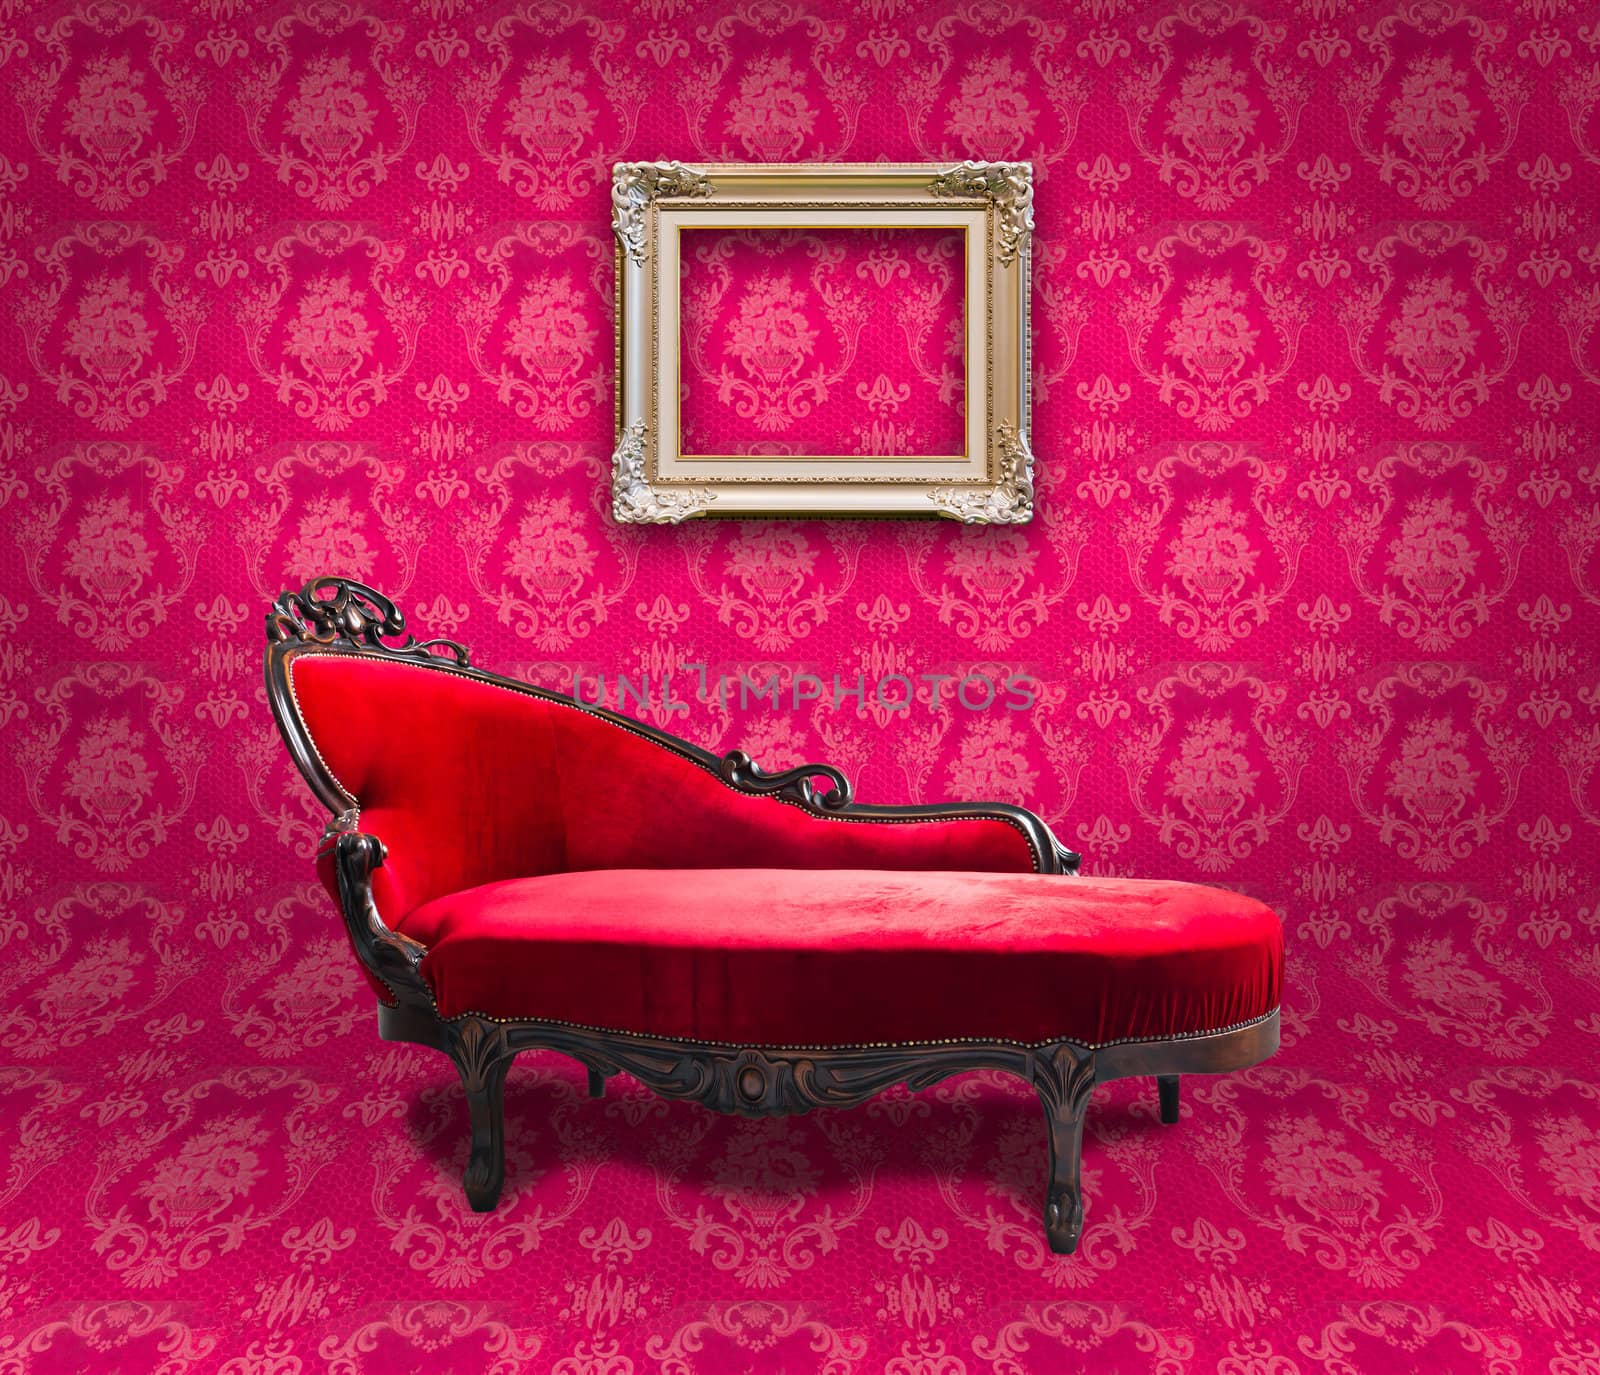 red luxury sofa and frame in pink room